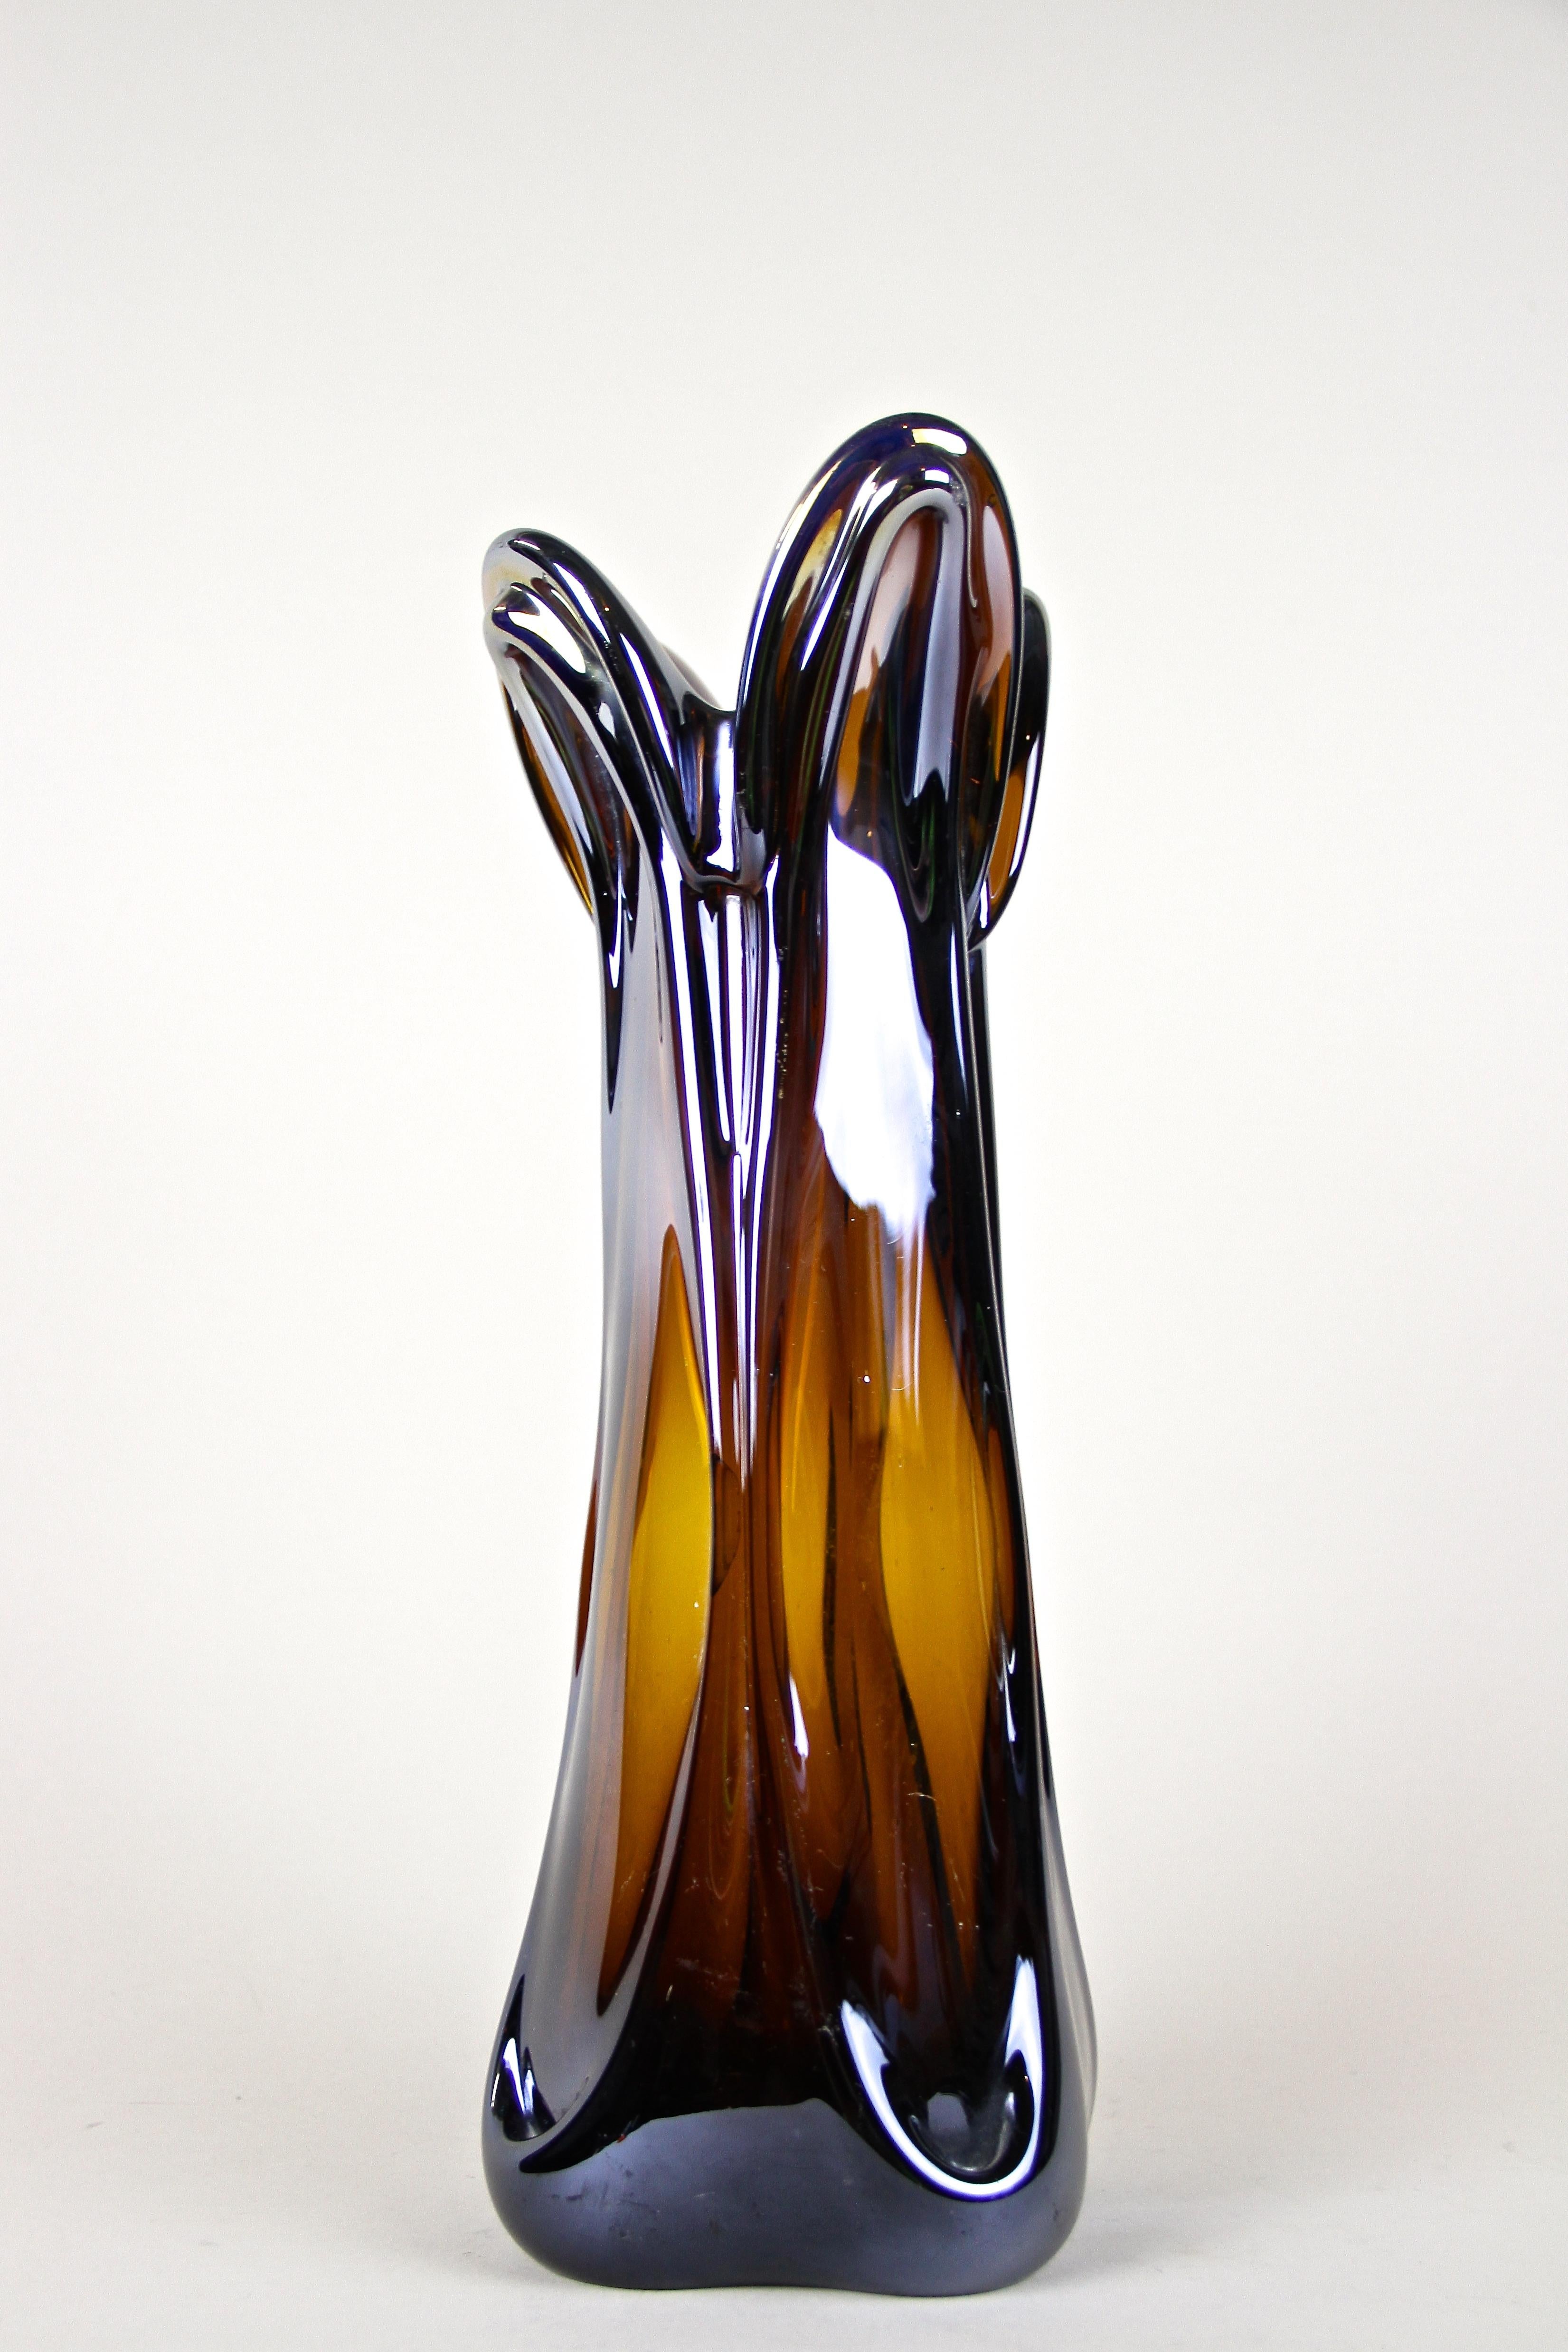 Italian Iridiscent Murano Glass Vase Amber Colored with Chrome Effect, Italy circa 1970 For Sale